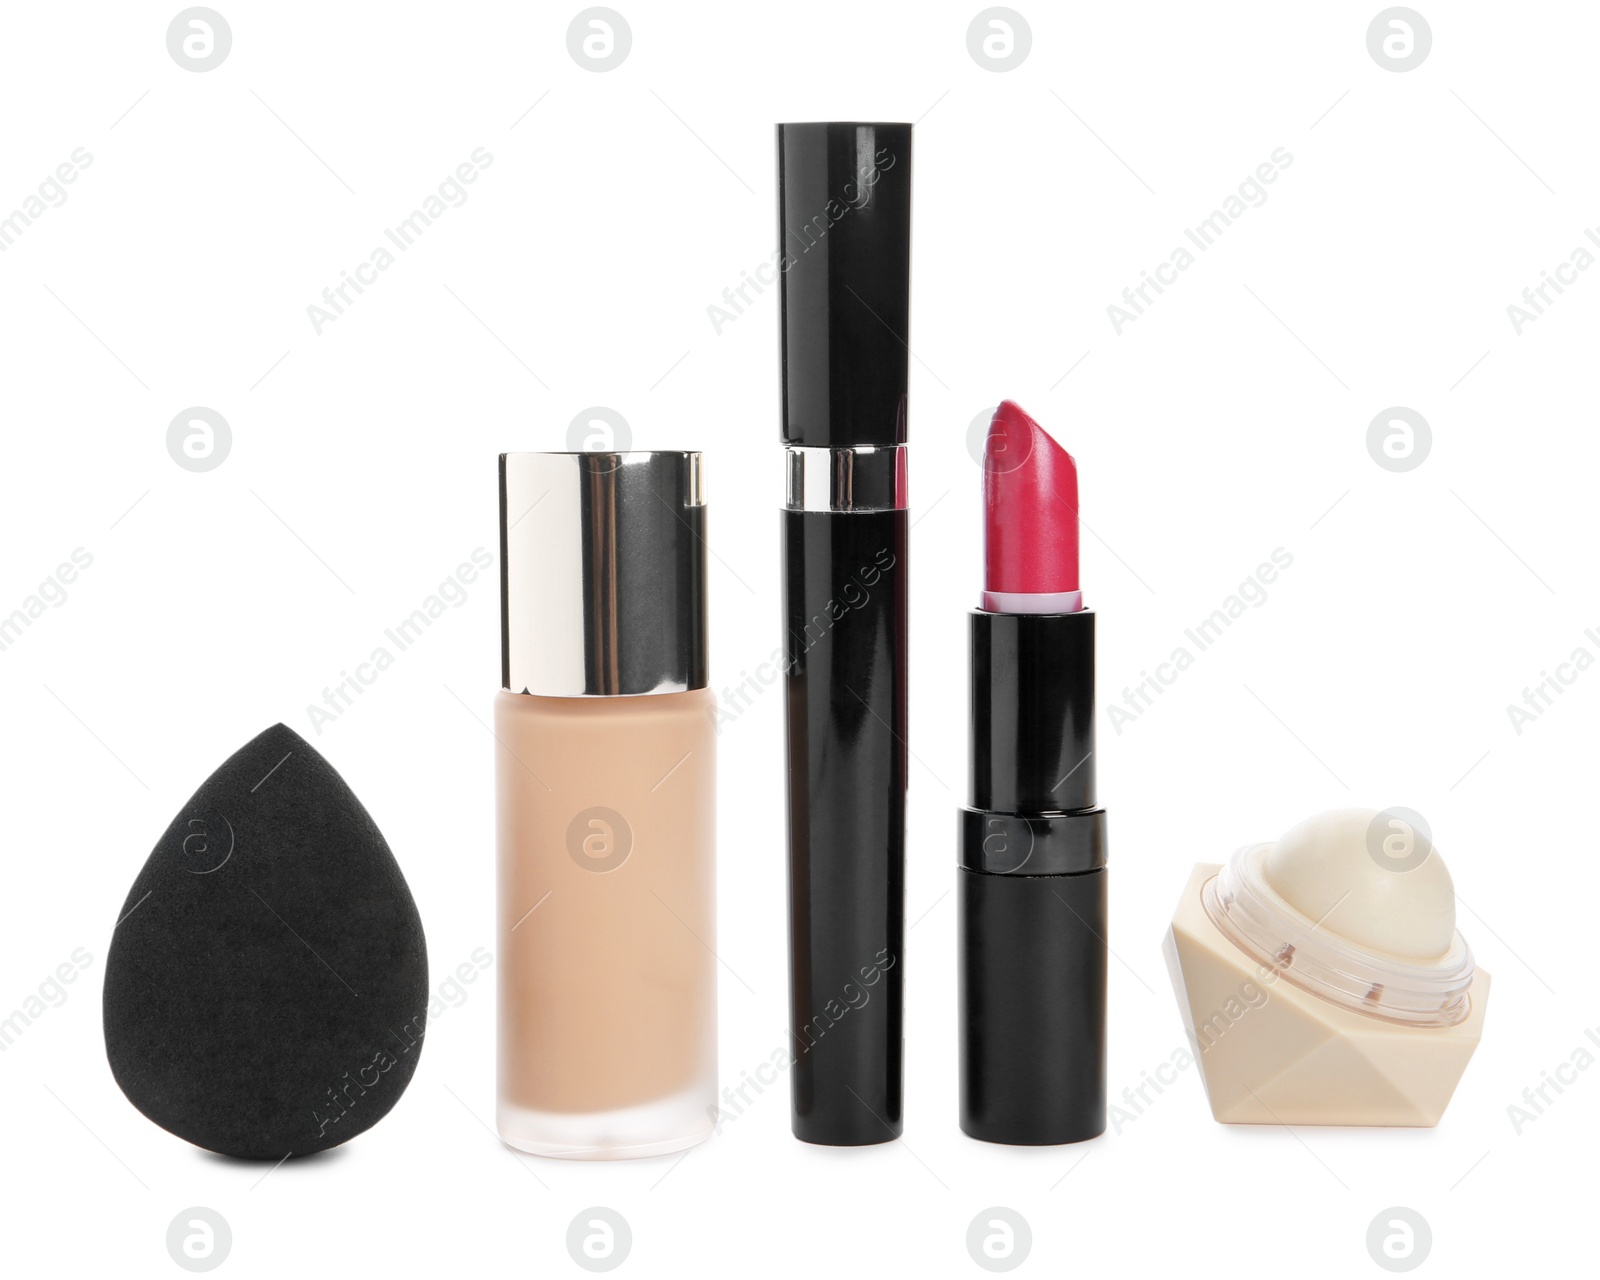 Photo of Set of makeup products on white background